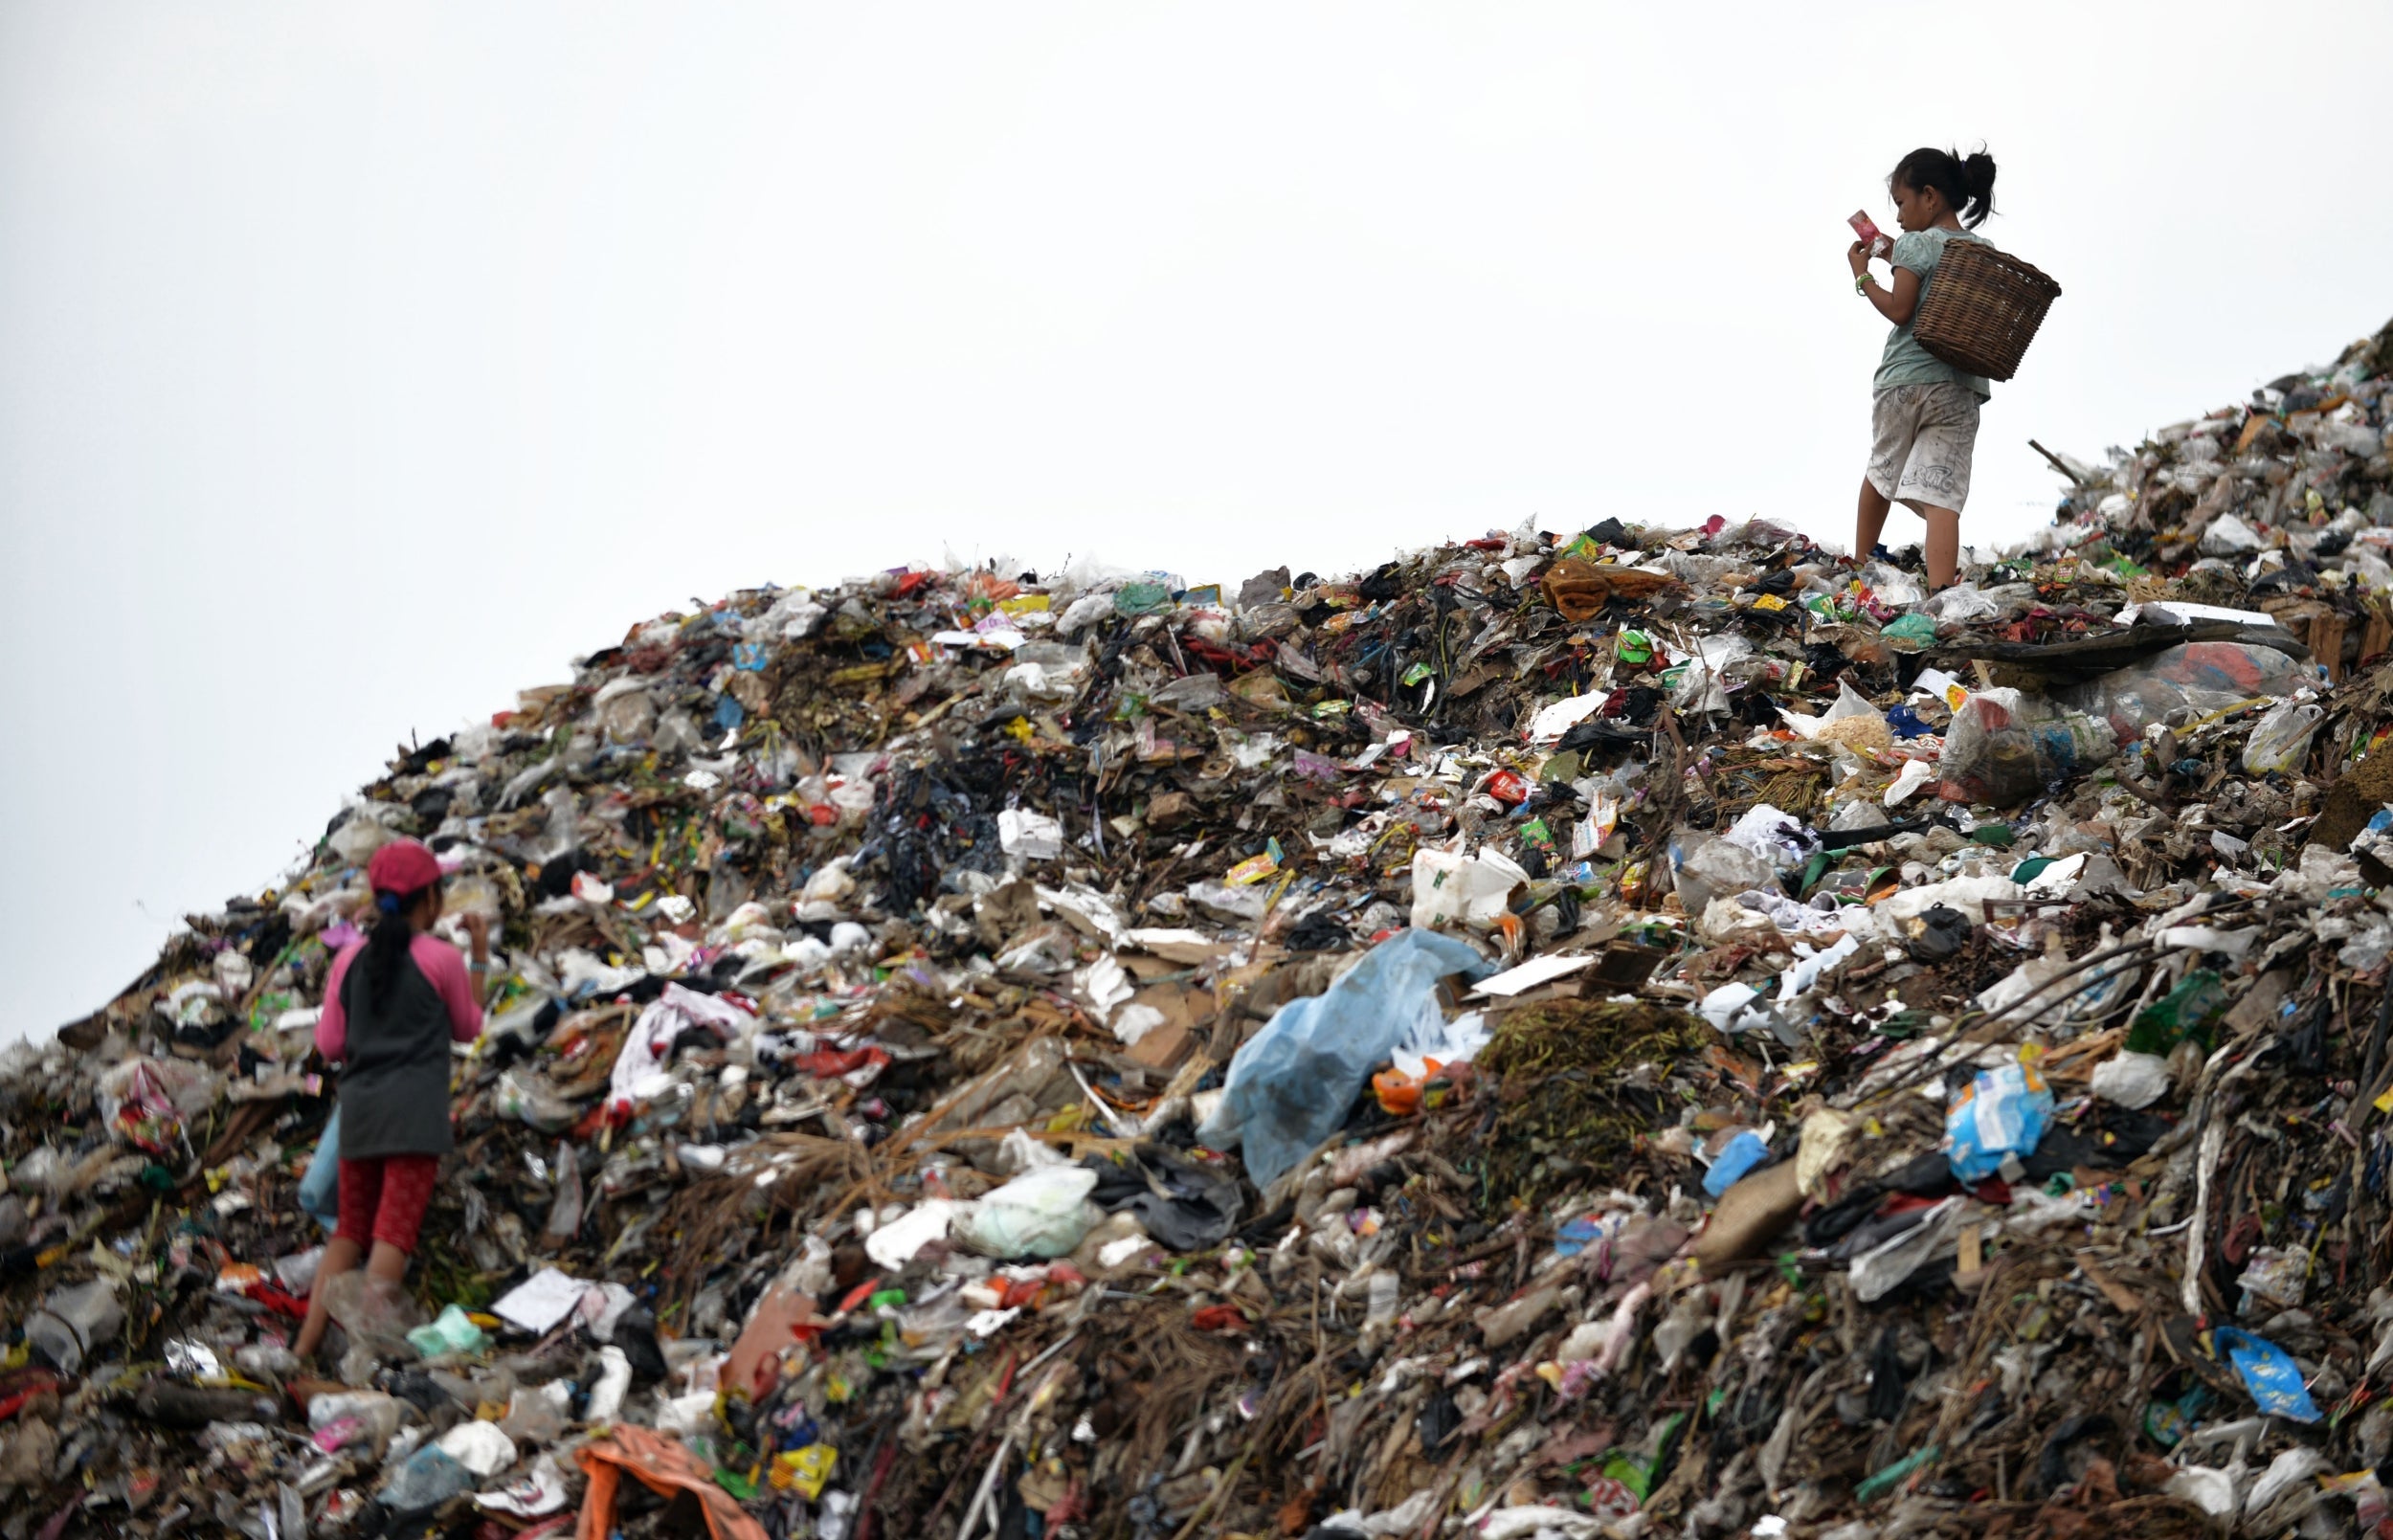 A child scavengers sorting through a pile of waste at a dump area of Bantar Gebang